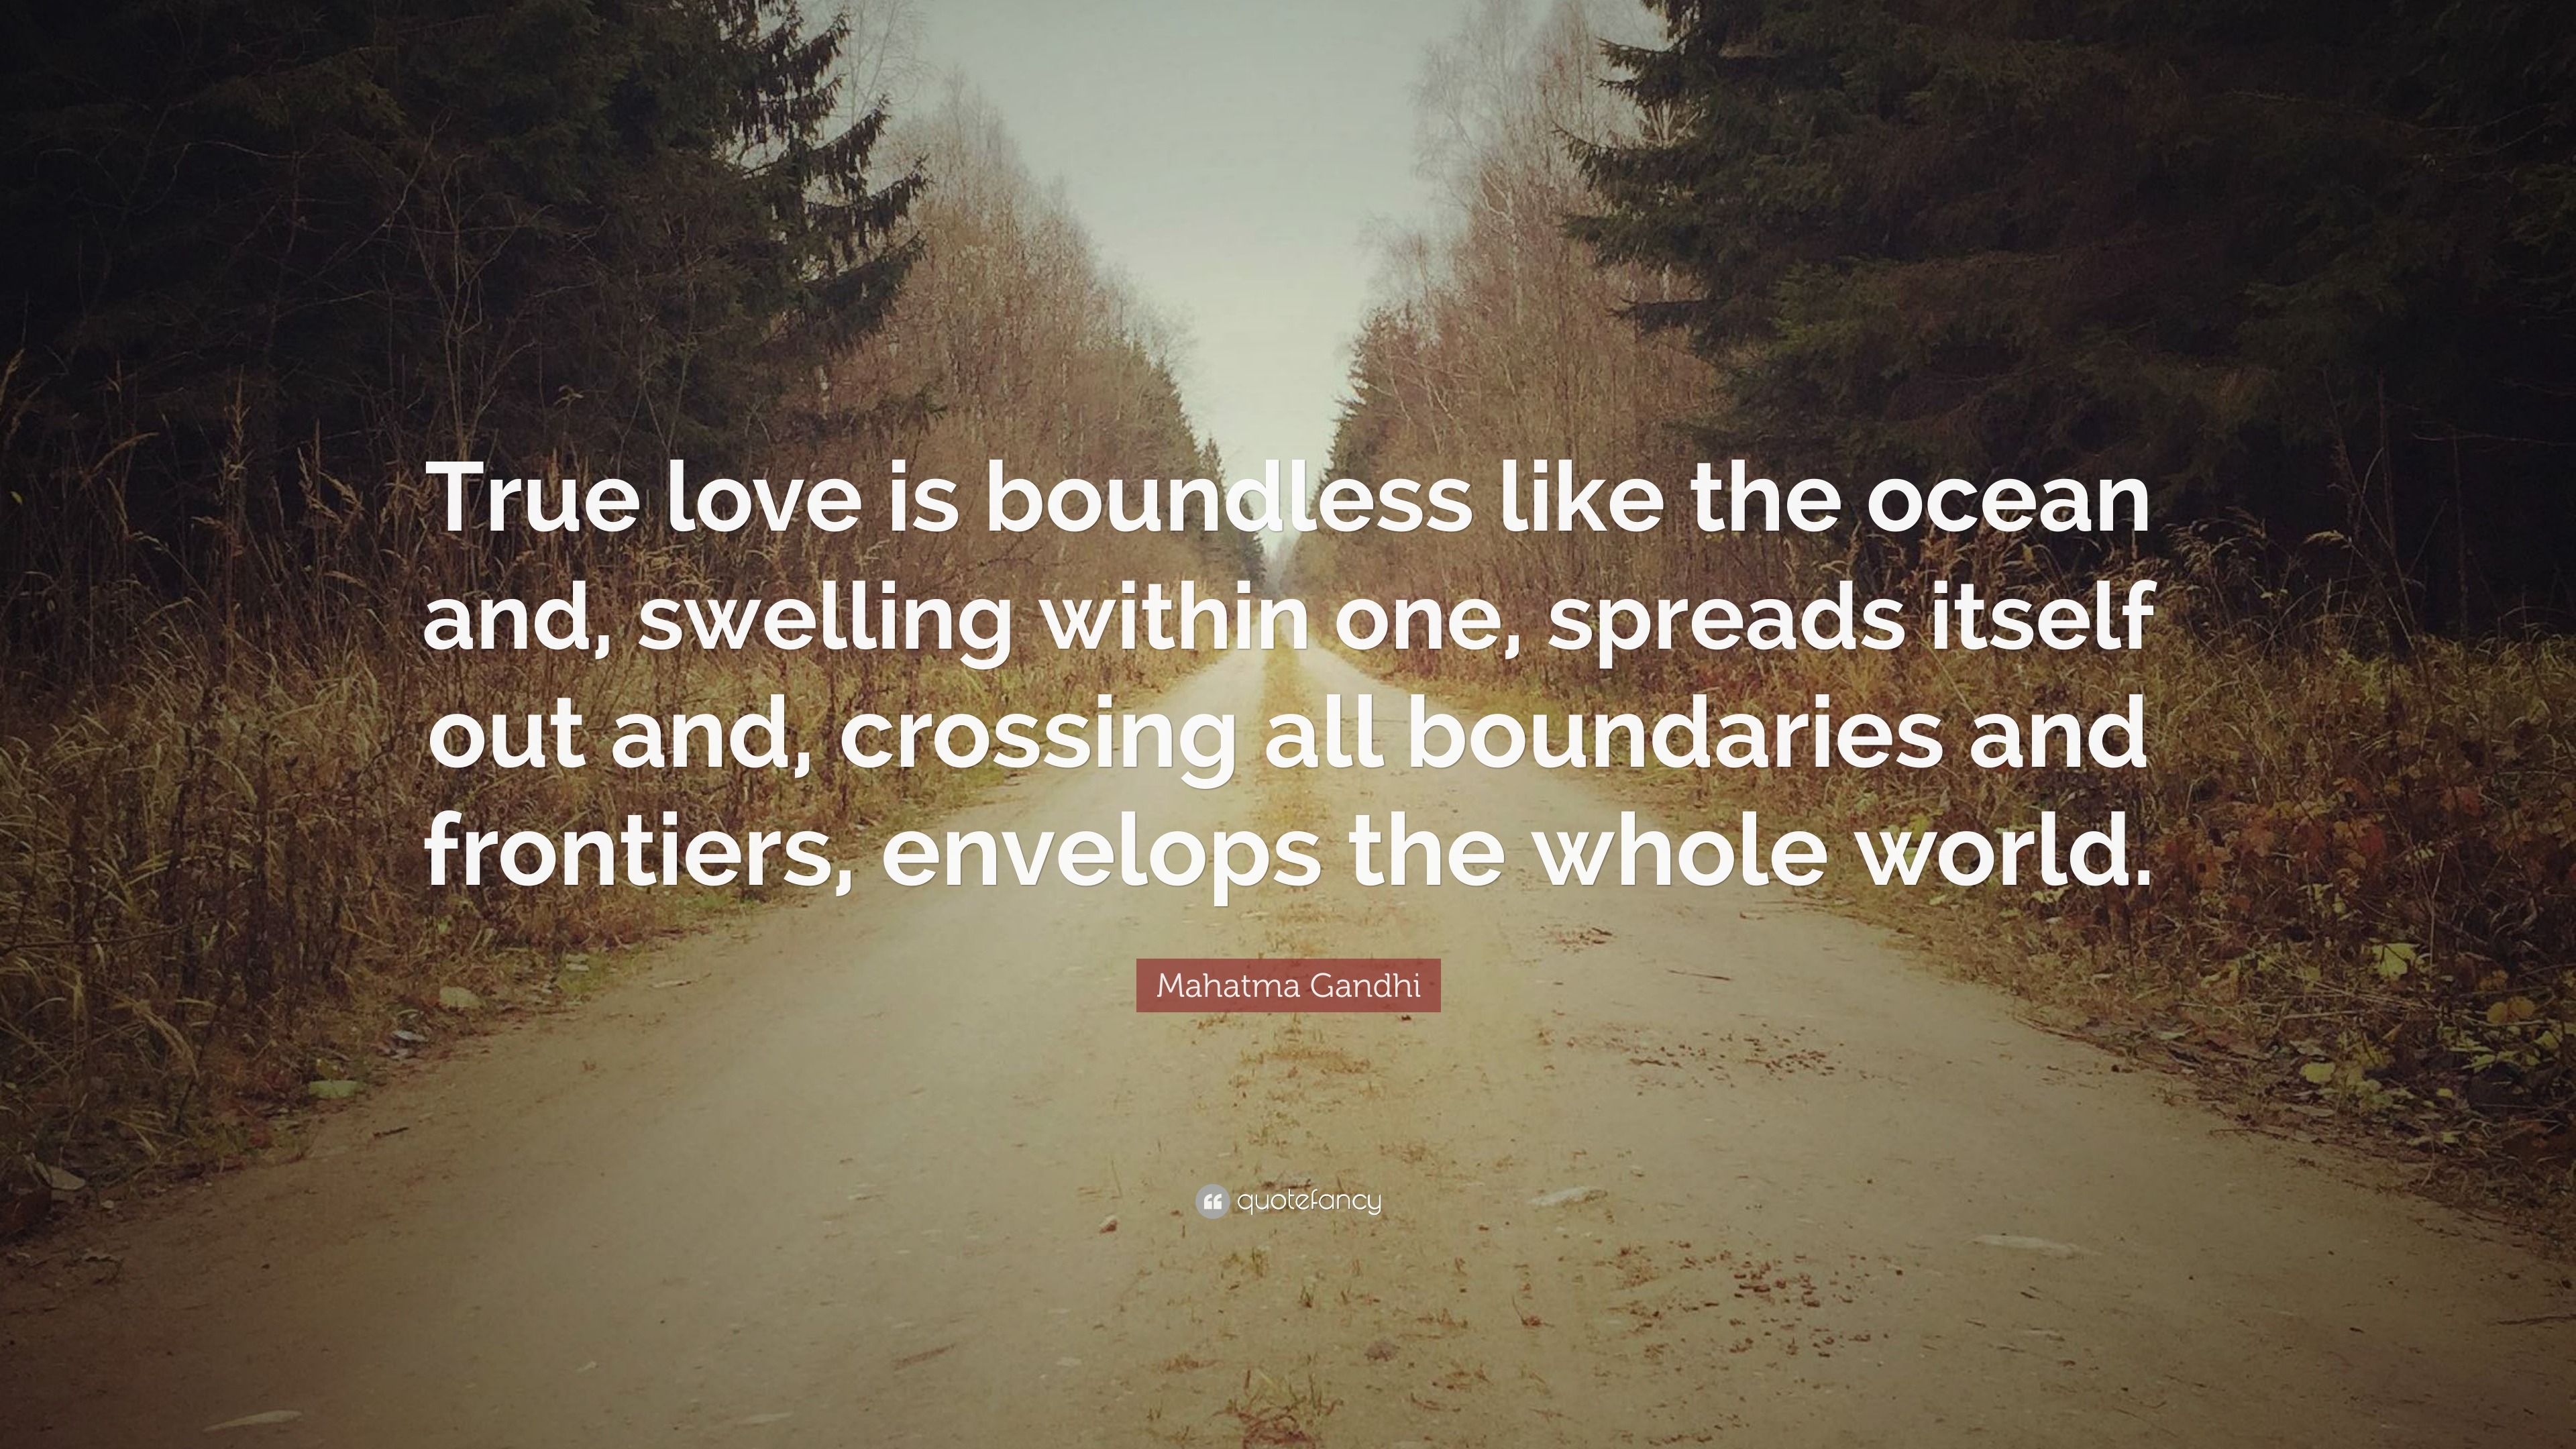 Mahatma Gandhi Quote “True love is boundless like the ocean and swelling within